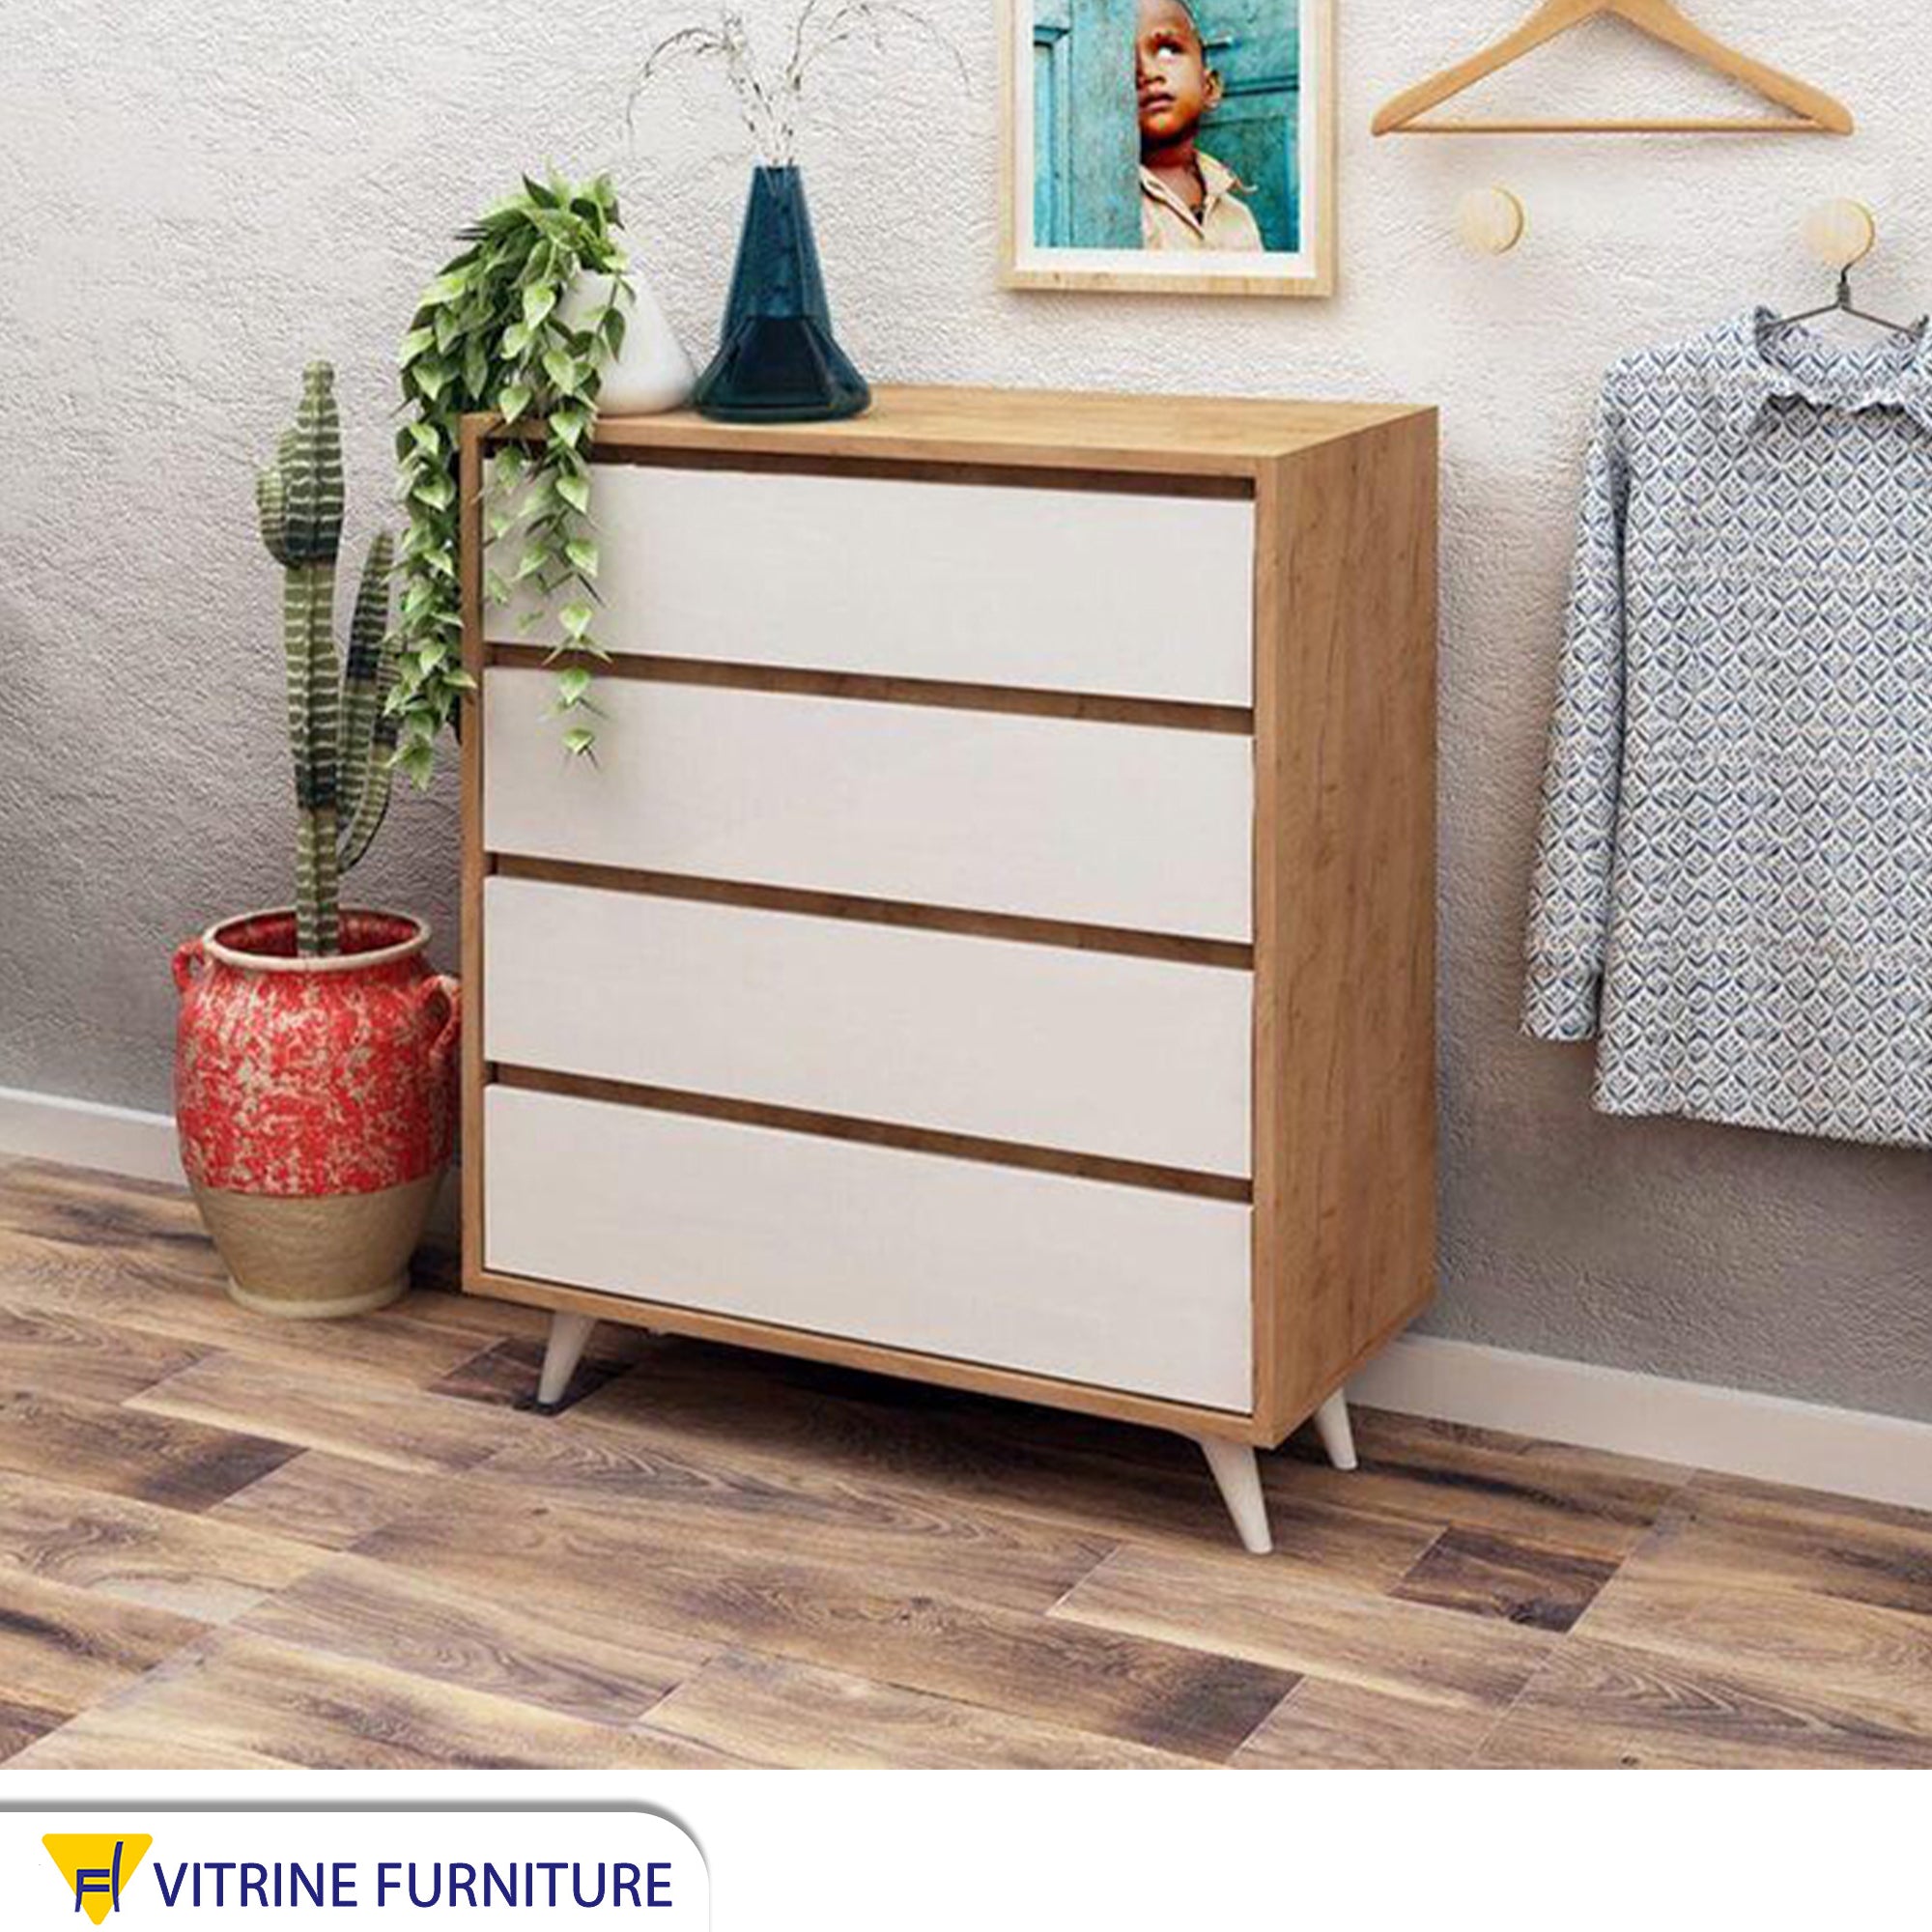 White drawer unit with wooden legs